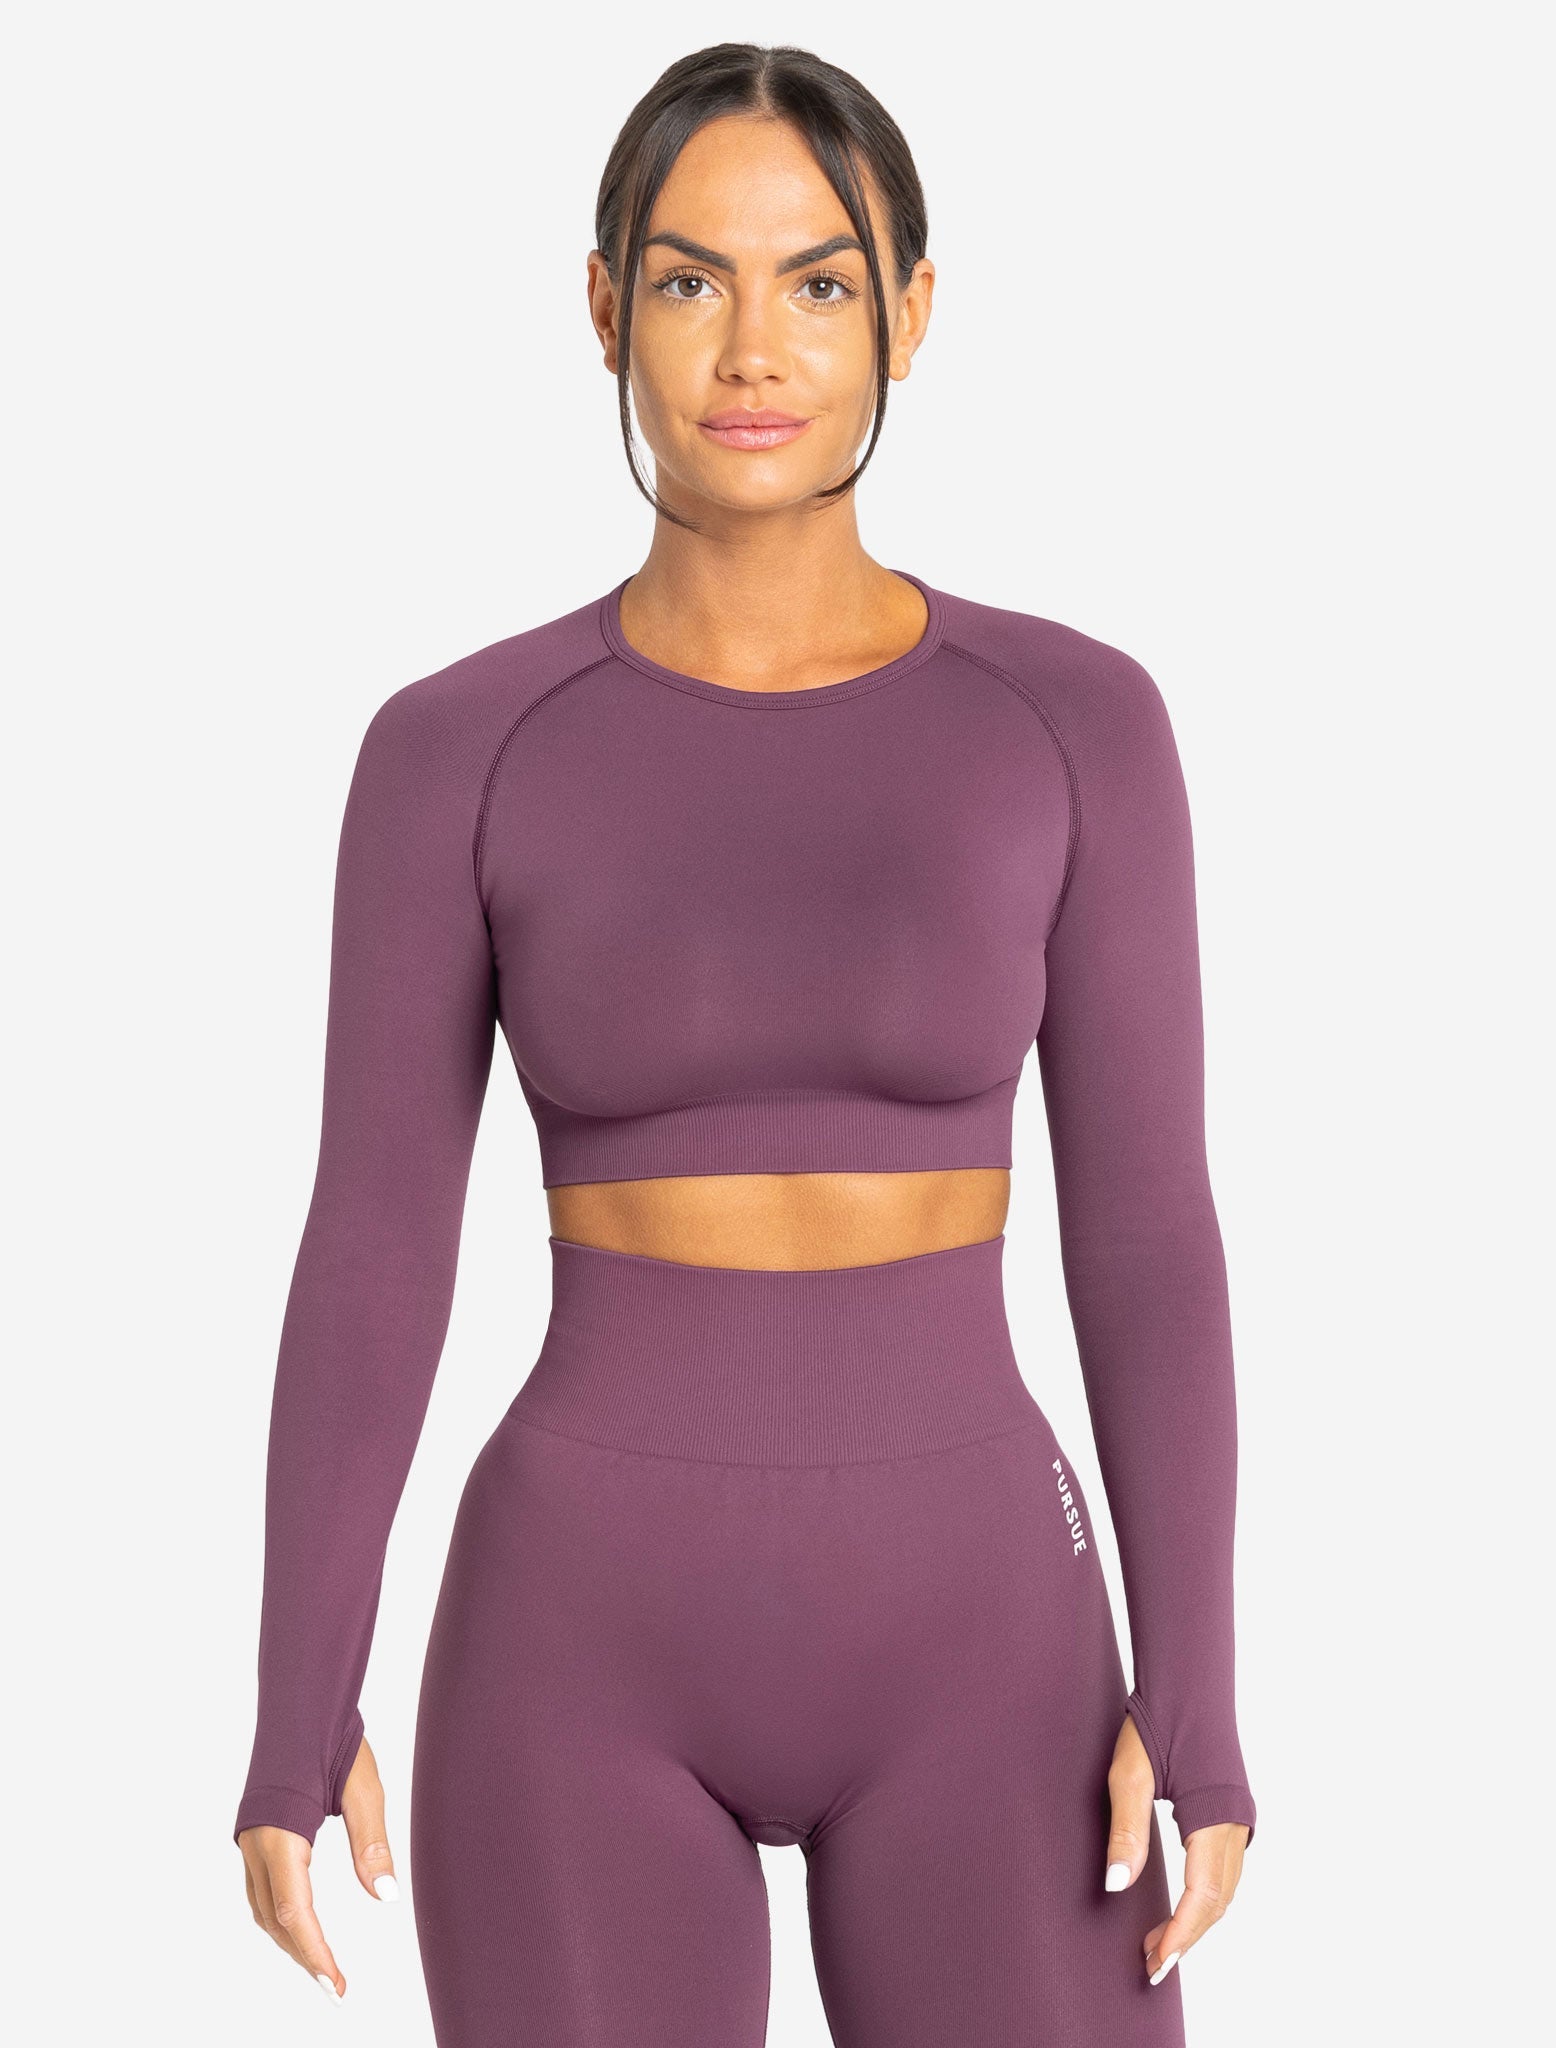 Physio.Fit.Co Plum Extra Scrunch Bum Leggings & Luxe Crop Top